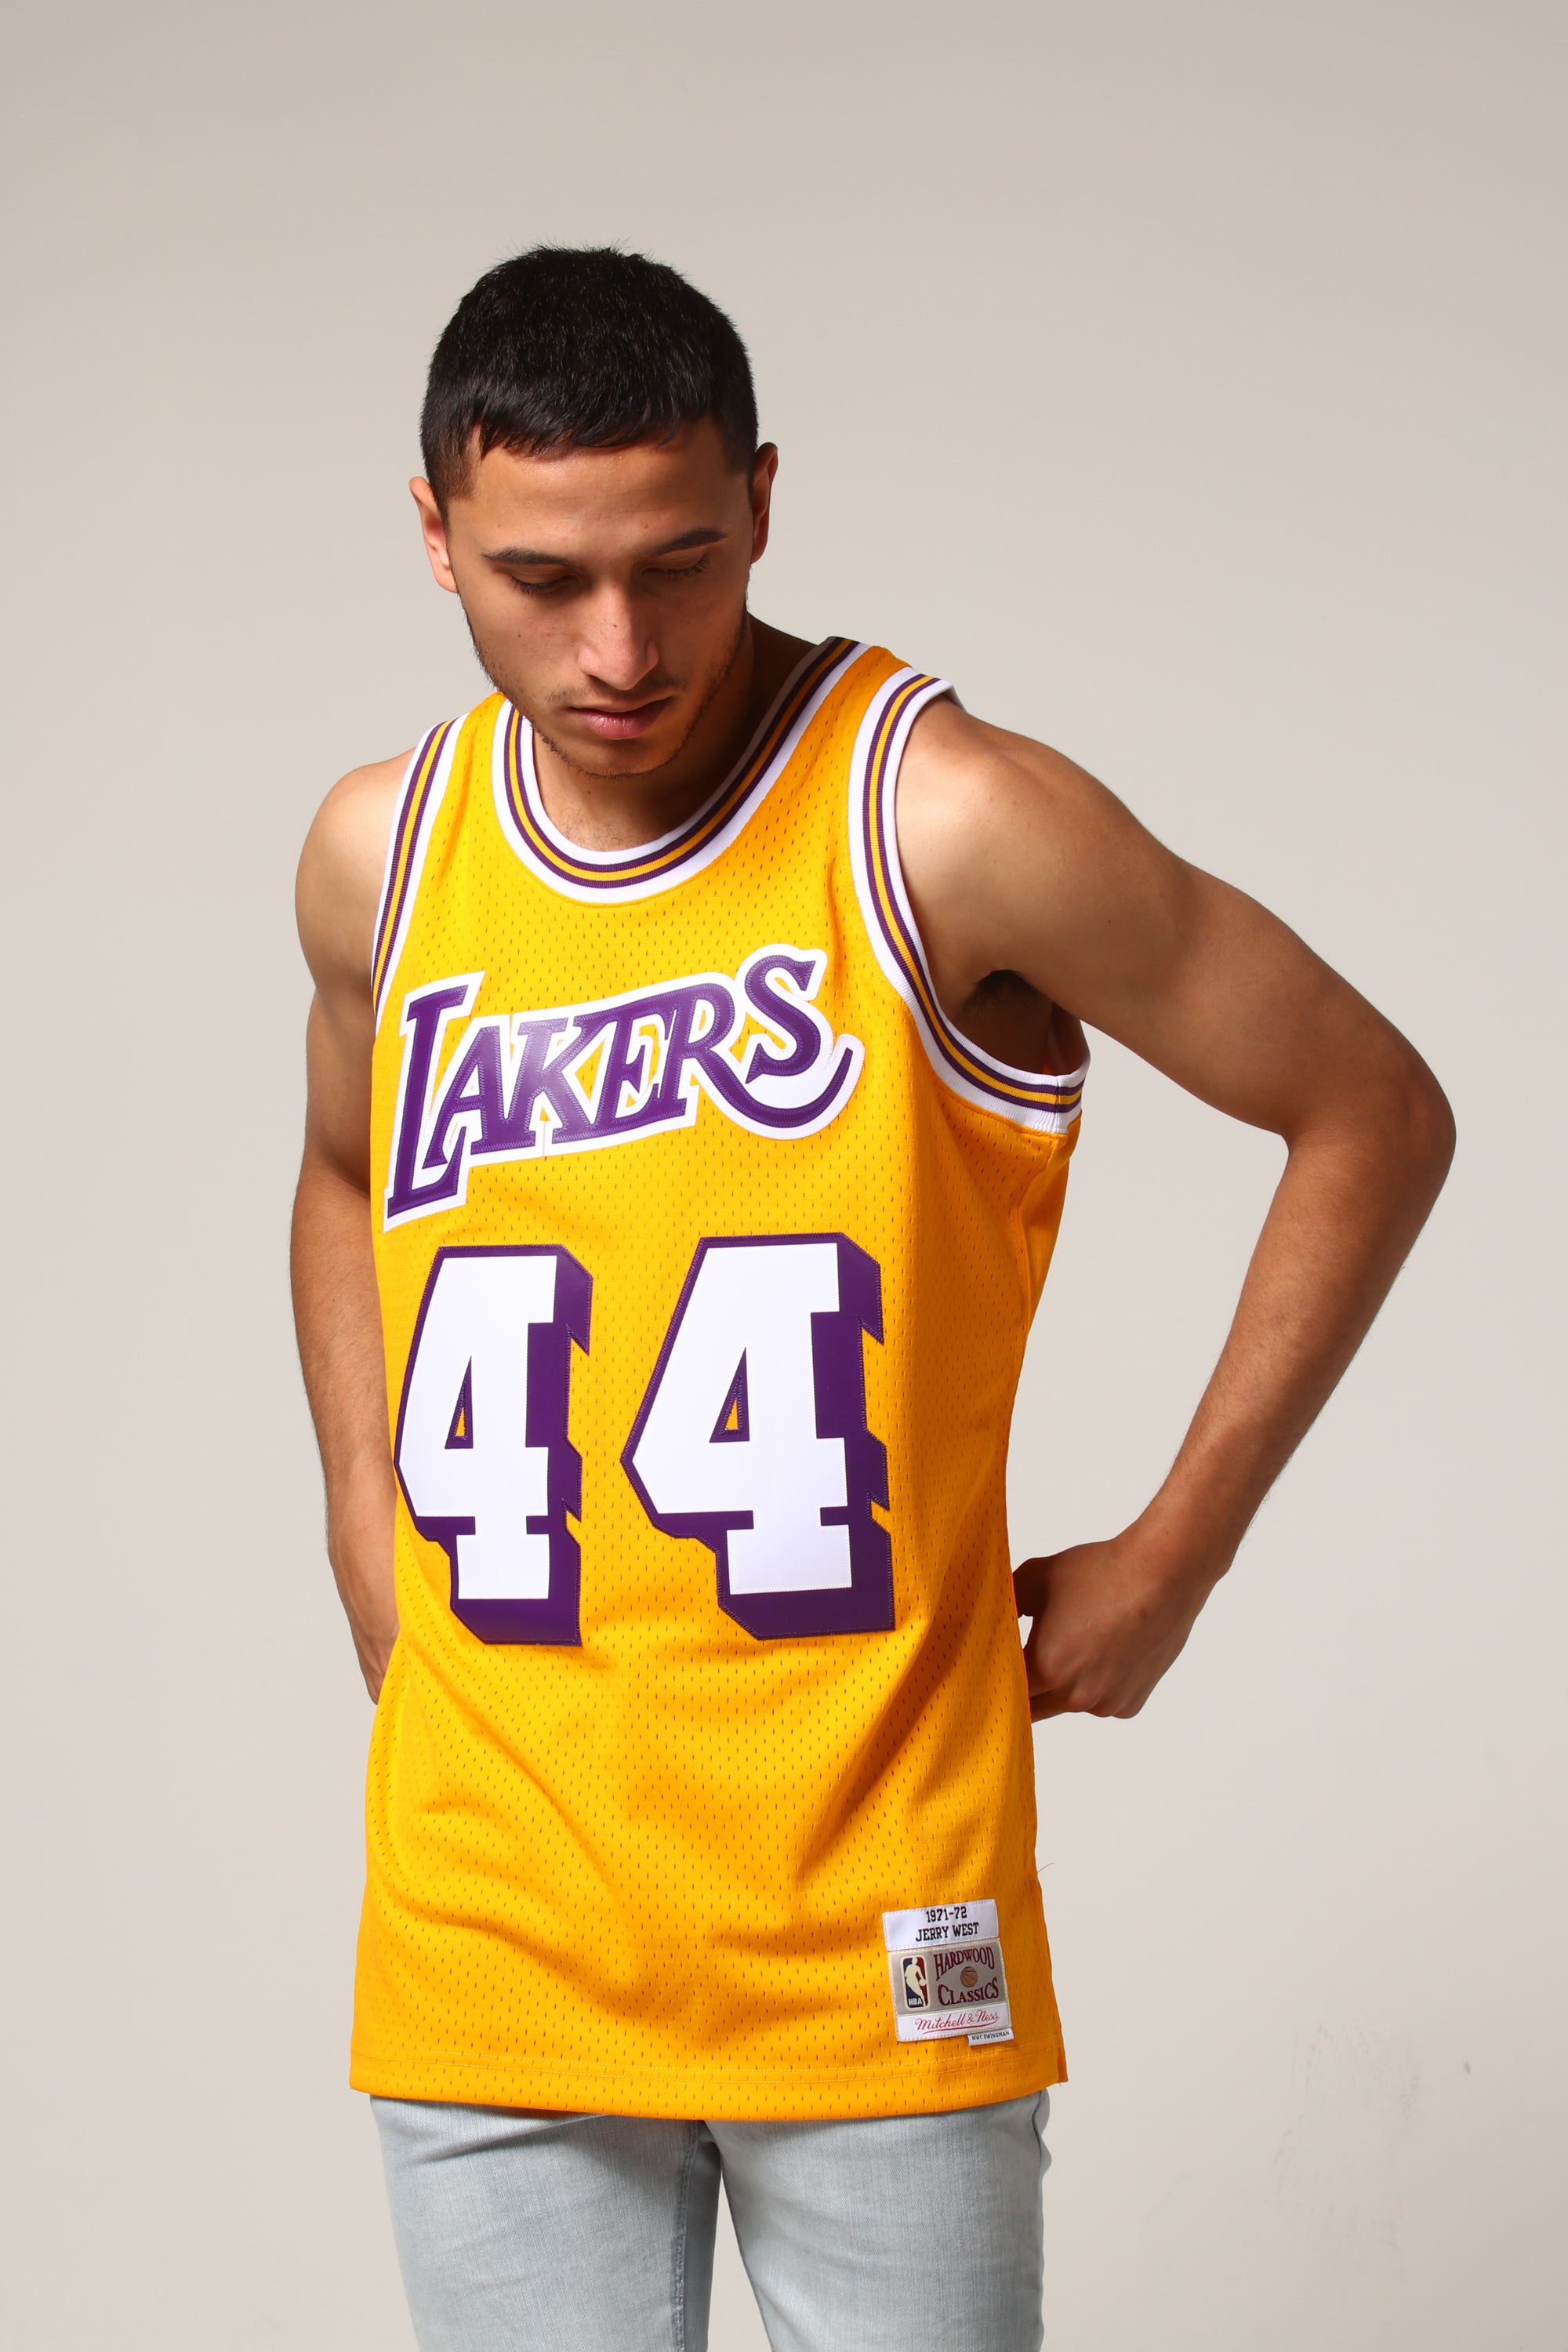 jerry west throwback jersey